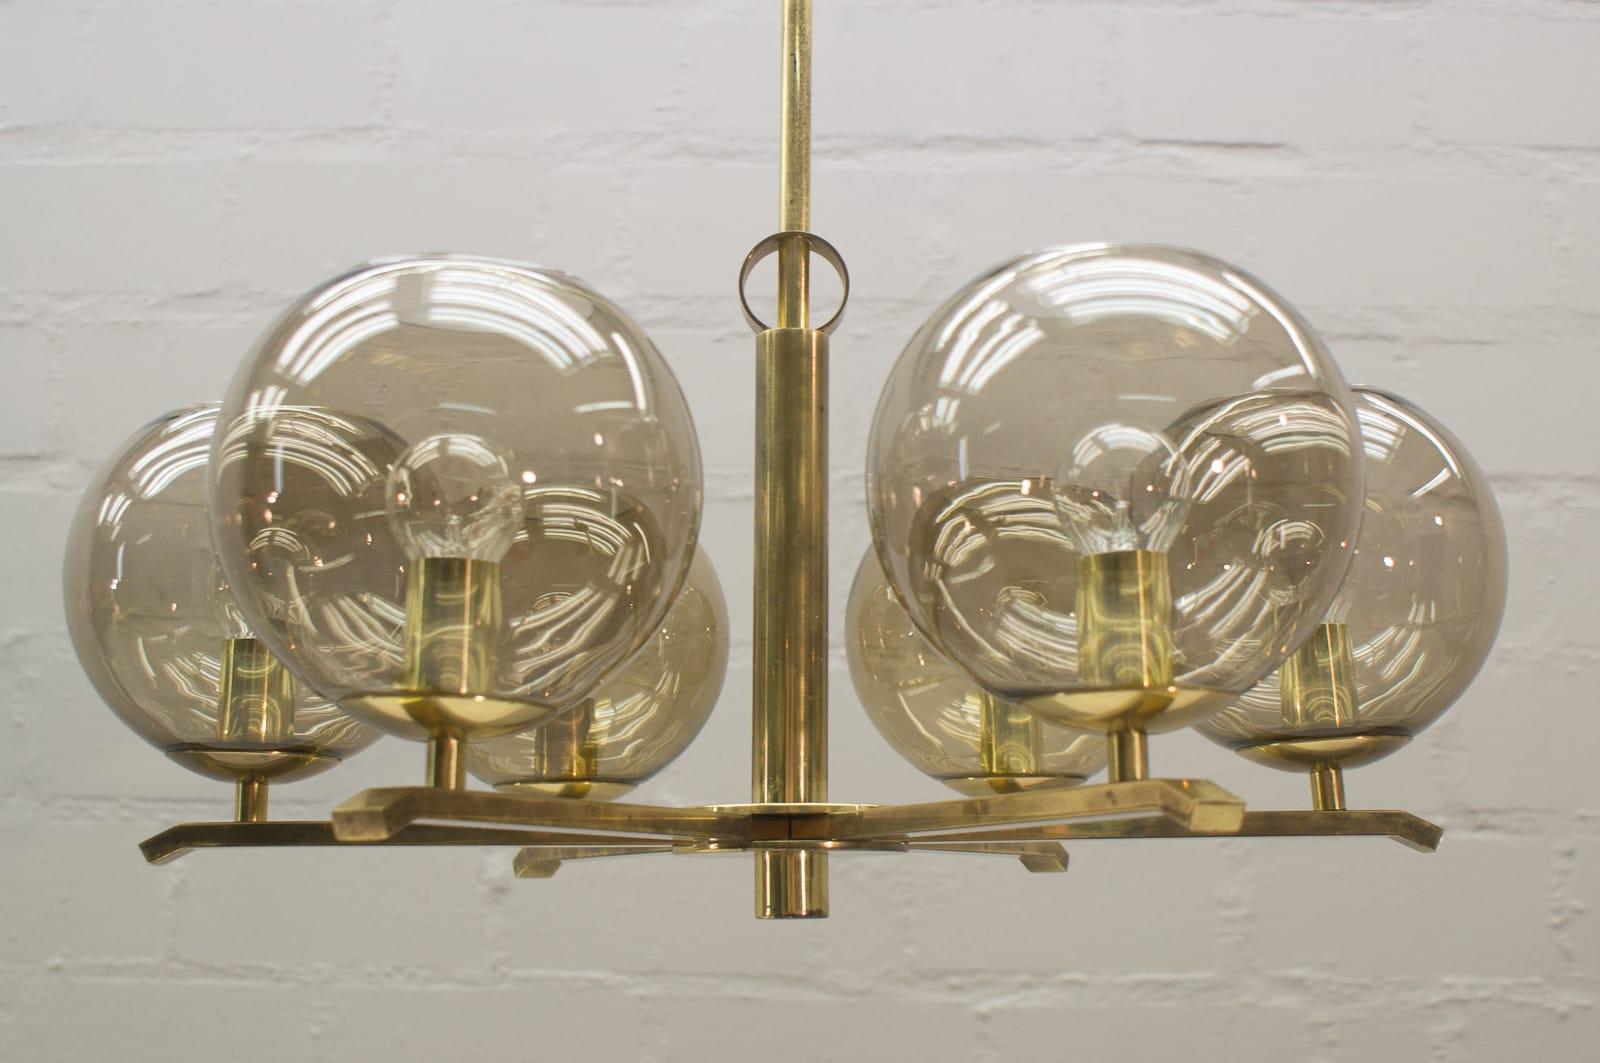 Elegant 1960s Brass Ceiling Lamp with 8 Smoked Glass Globes, Germany For Sale 4